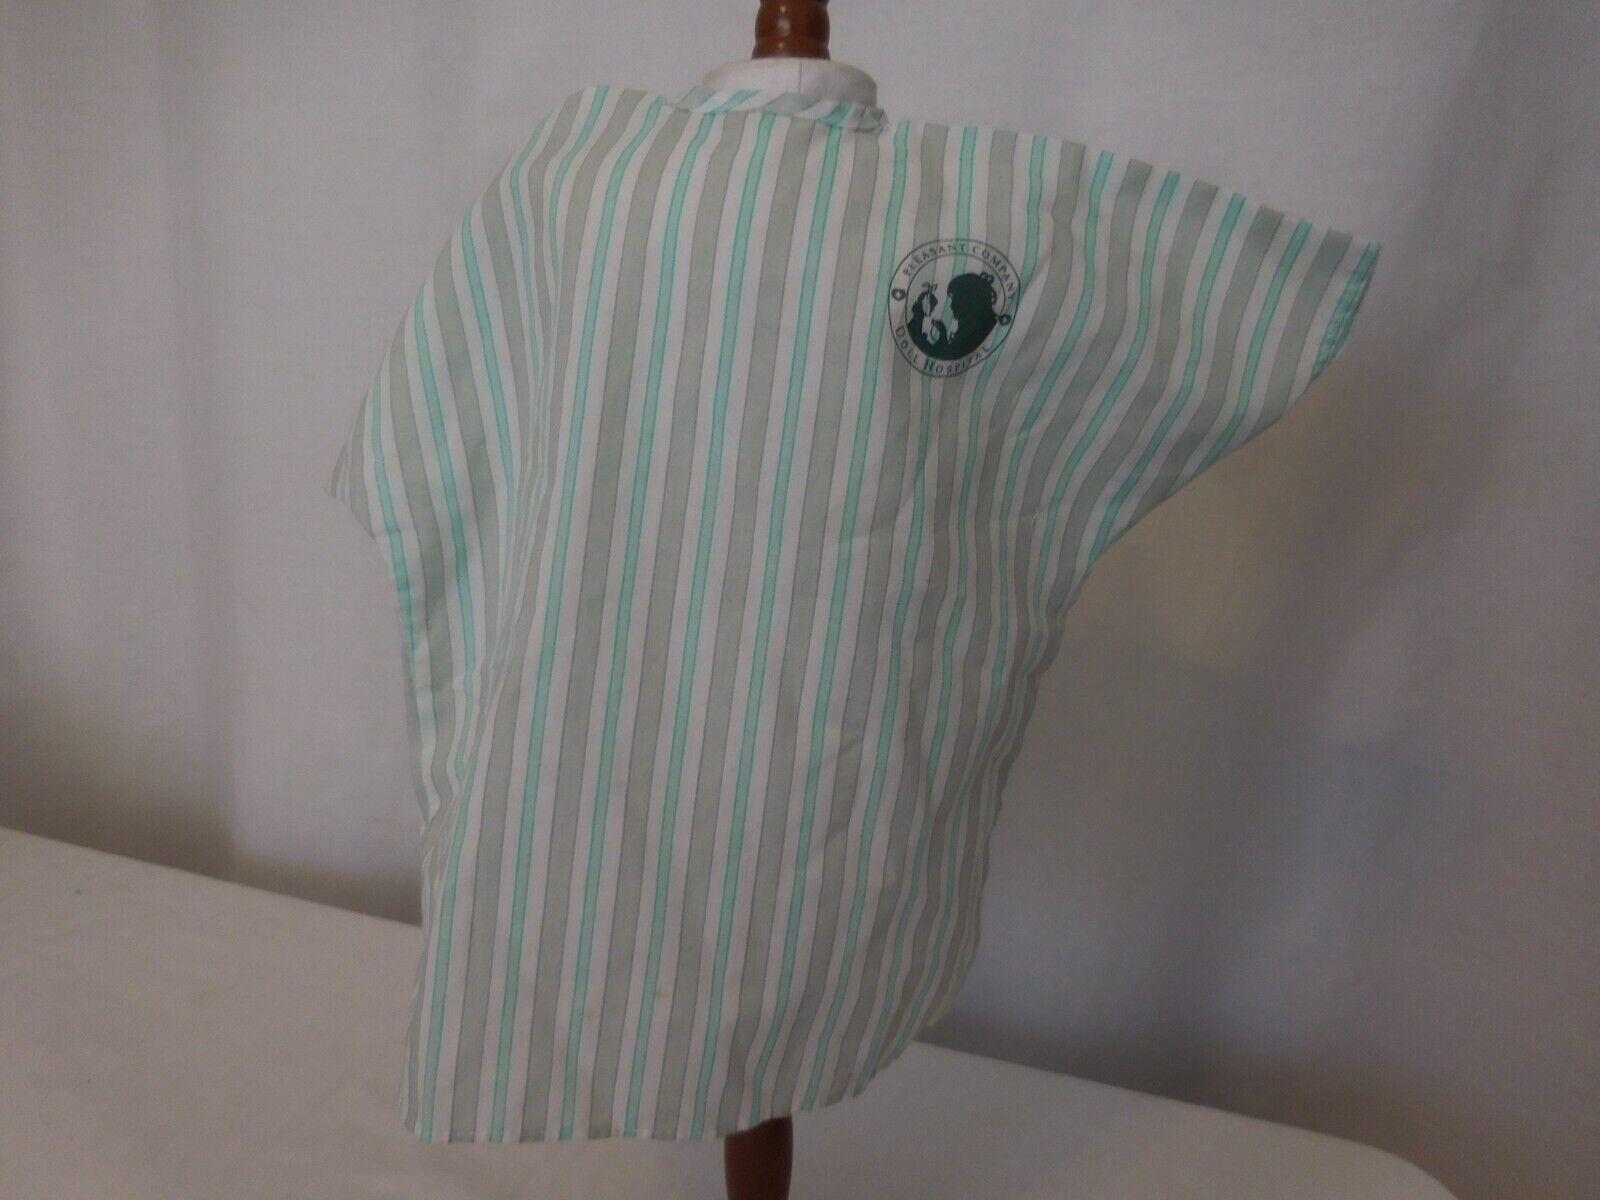 Pleasant Company American Girl Doll Hospital Gown Retired Vintage HTF - $10.92